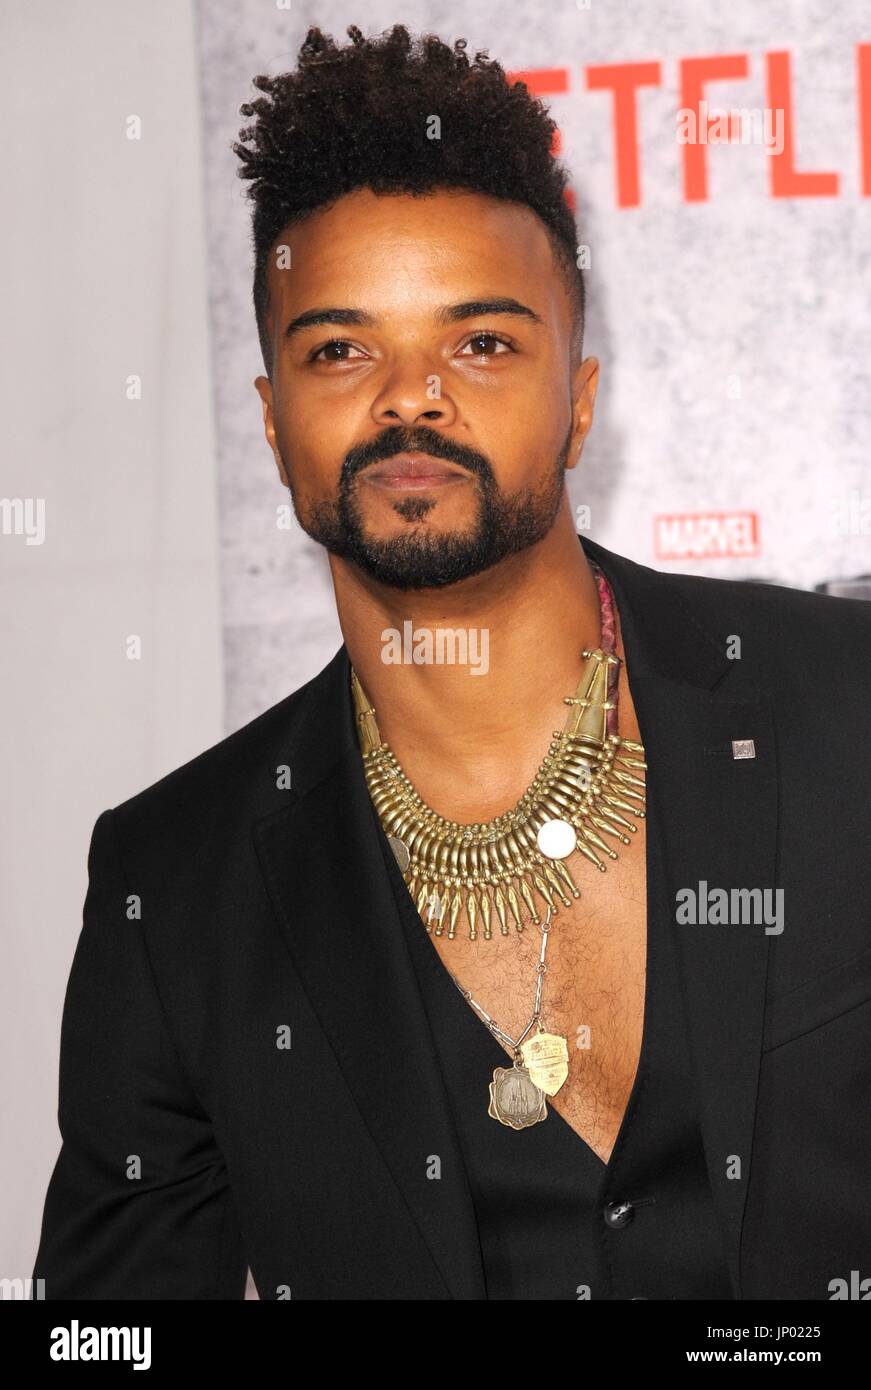 New York, NY, USA. 31st July, 2017. Eka Darville at arrivals for Netflix's Premiere of Marvel's THE DEFENDERS, BMCC Tribeca Performing Arts Center, New York, NY July 31, 2017. Credit: Kristin Callahan/Everett Collection/Alamy Live News Stock Photo